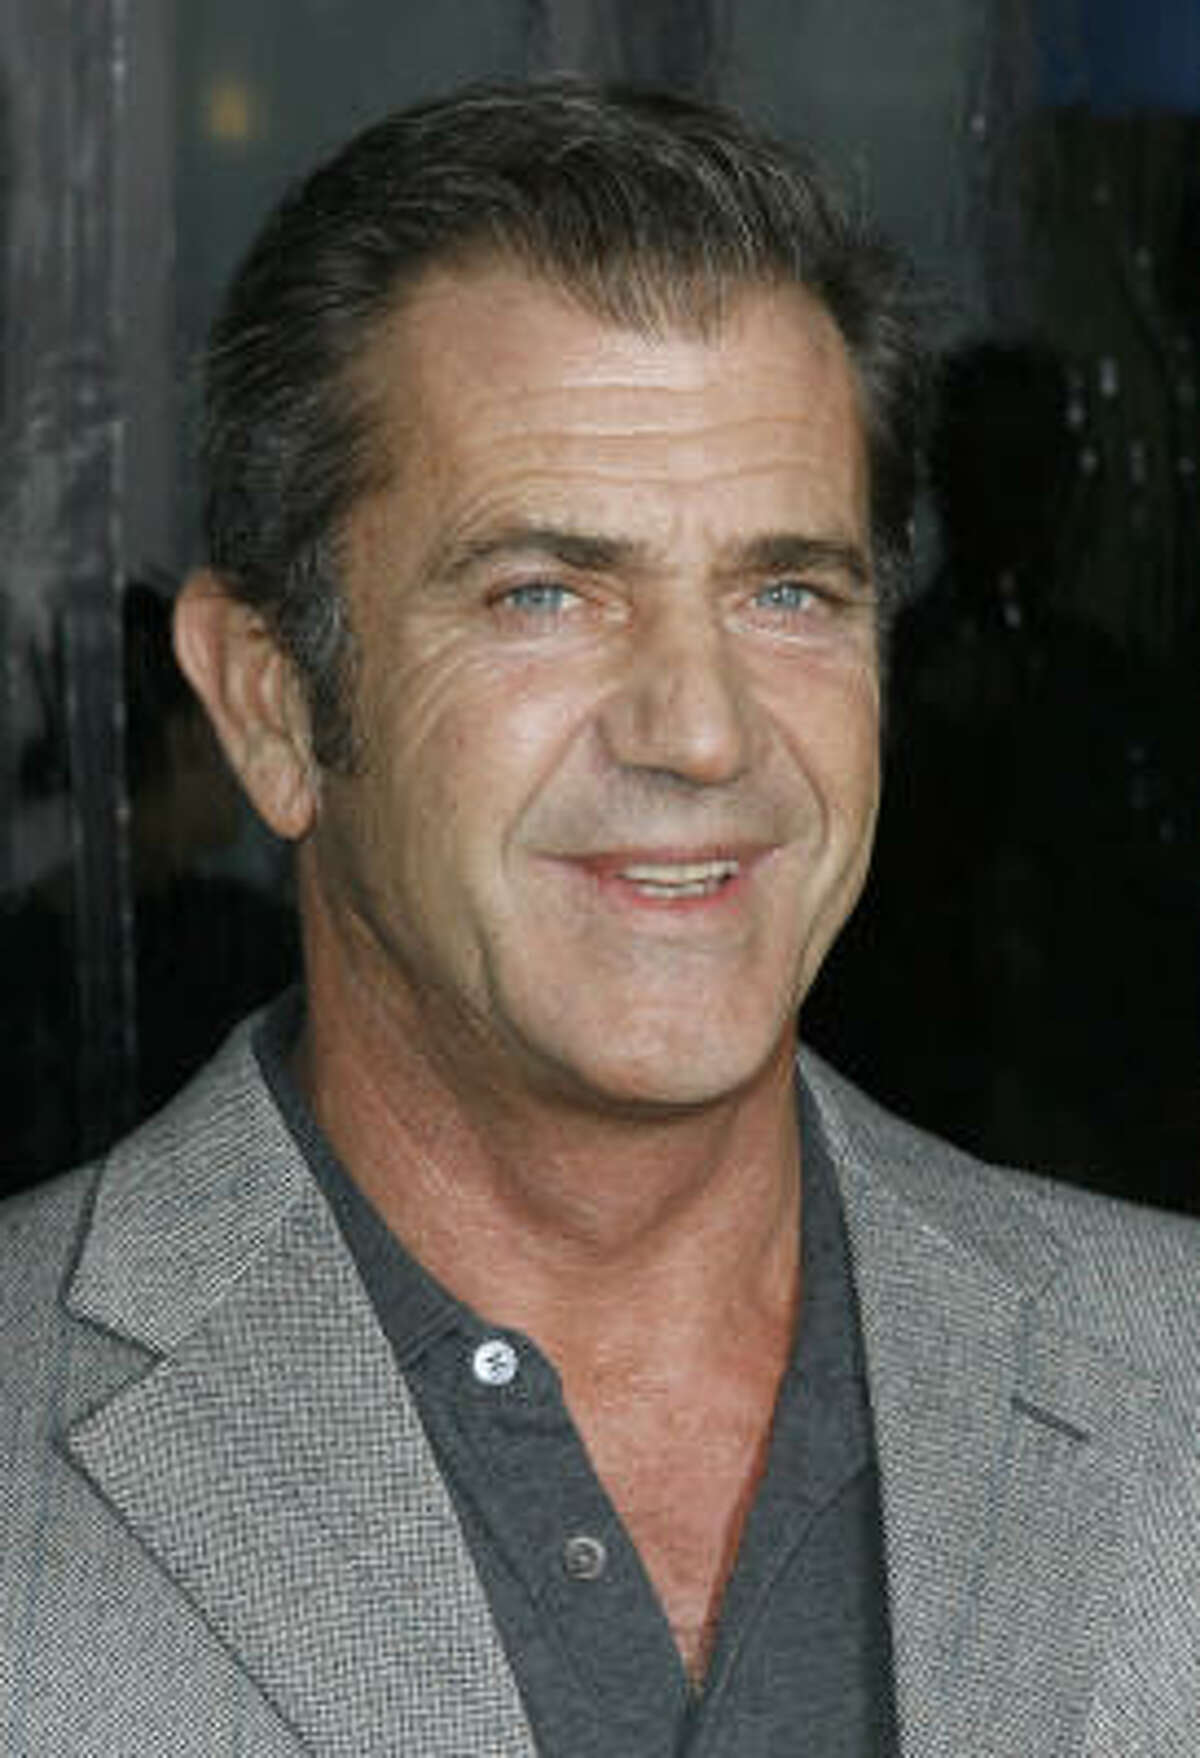 Mel Gibson took his legendary tirades to a whole new level when tapes were released of him cussing out girlfriend Oksana Grigorieva. Gibson previously made the list of parental train wrecks for leaving his of wife of 28 years (and the mother of 7 of his children) for Grigorieva.